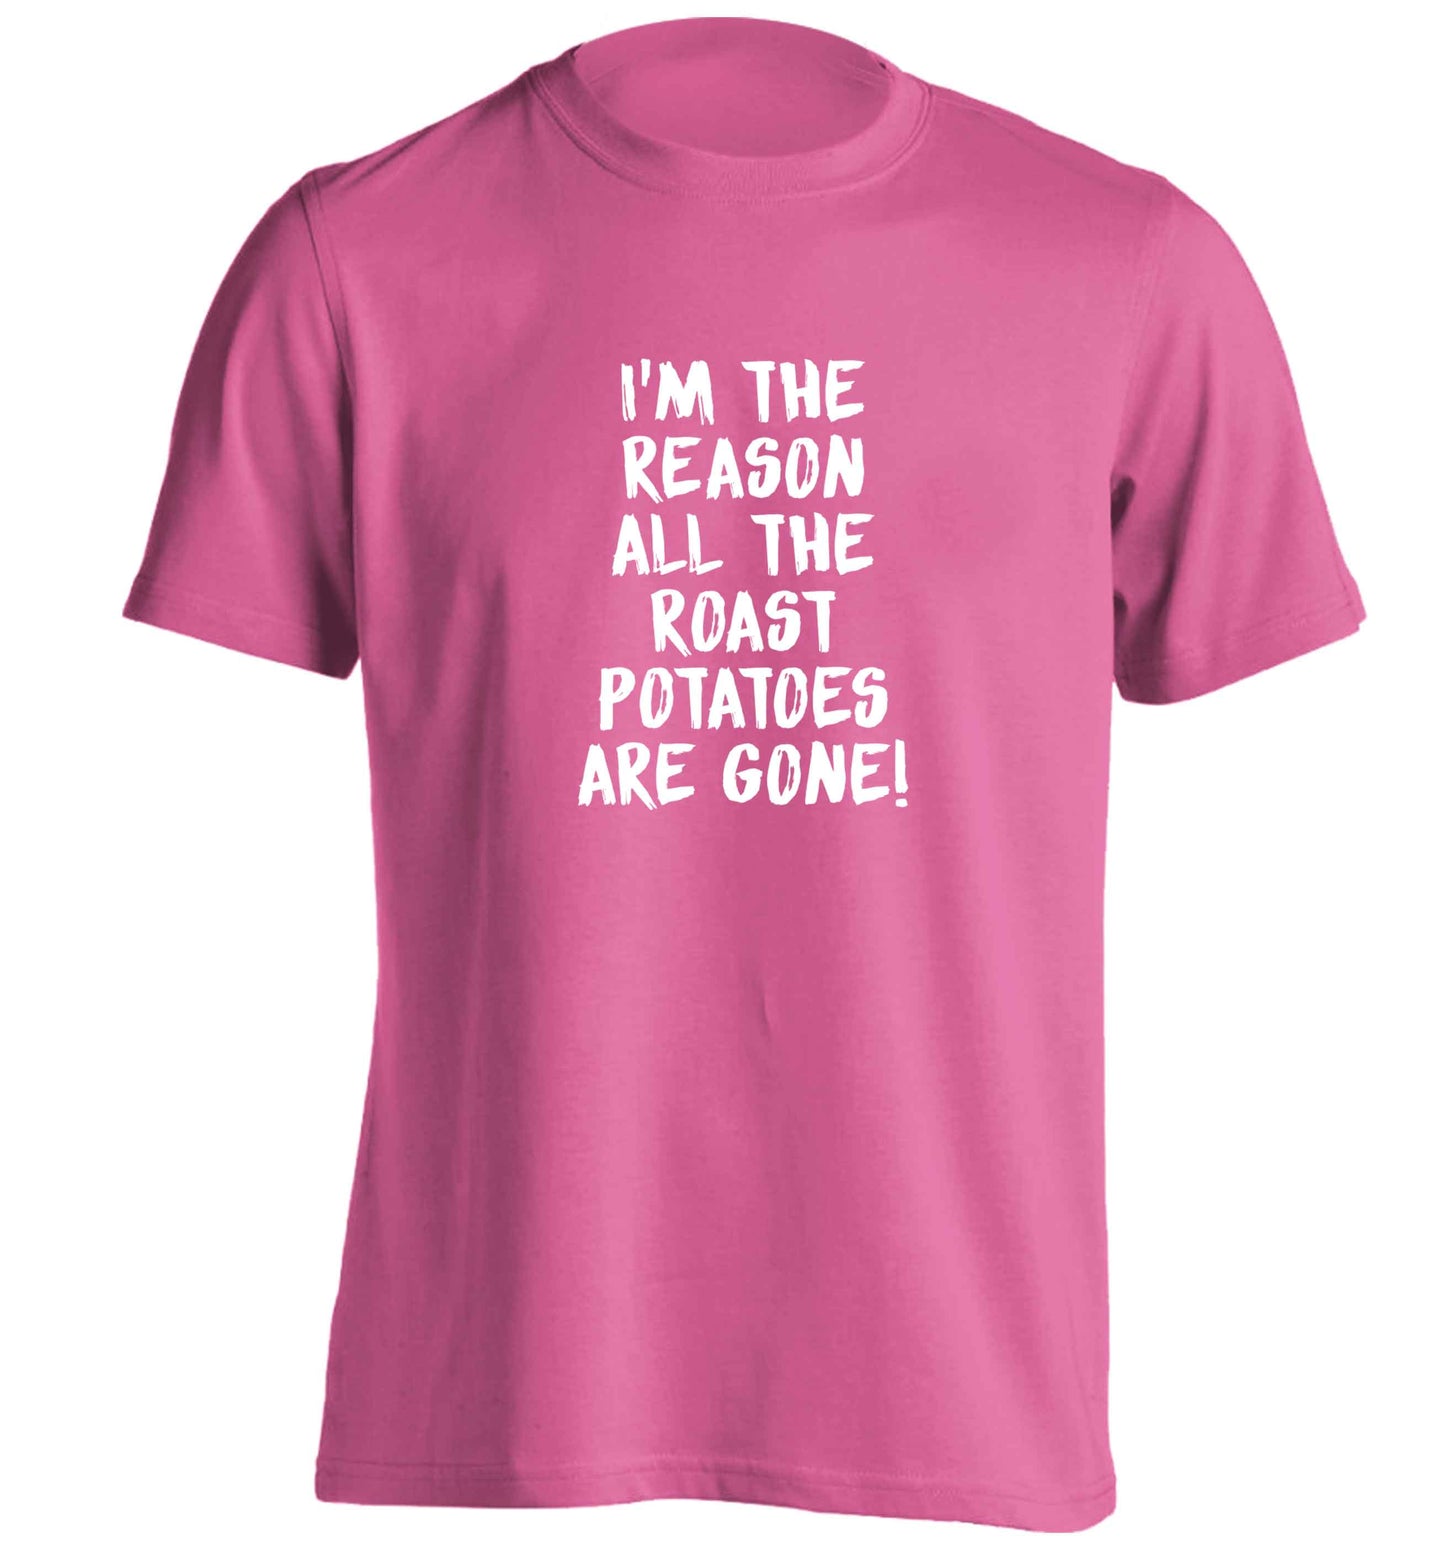 I'm the reason all the roast potatoes are gone adults unisex pink Tshirt 2XL